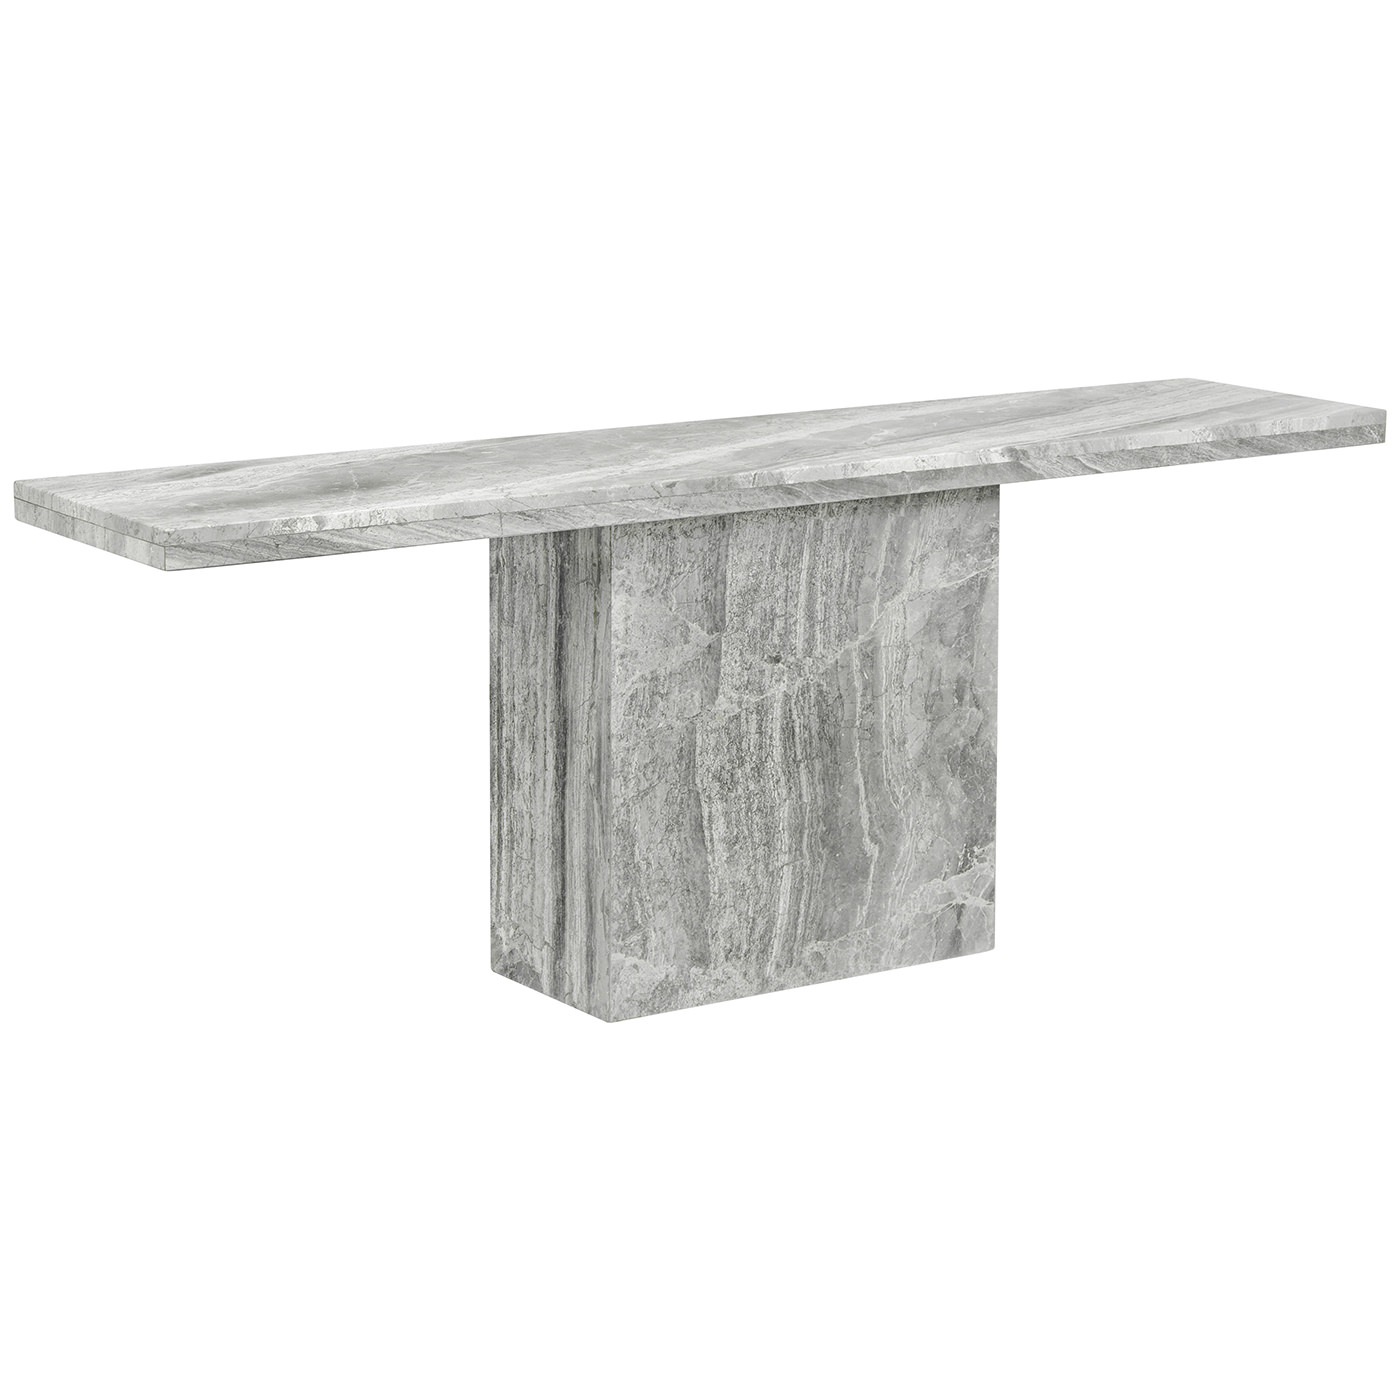 TS 1739 244 12 – Toulouse Console River Grey Marble 200x45x72 (2)